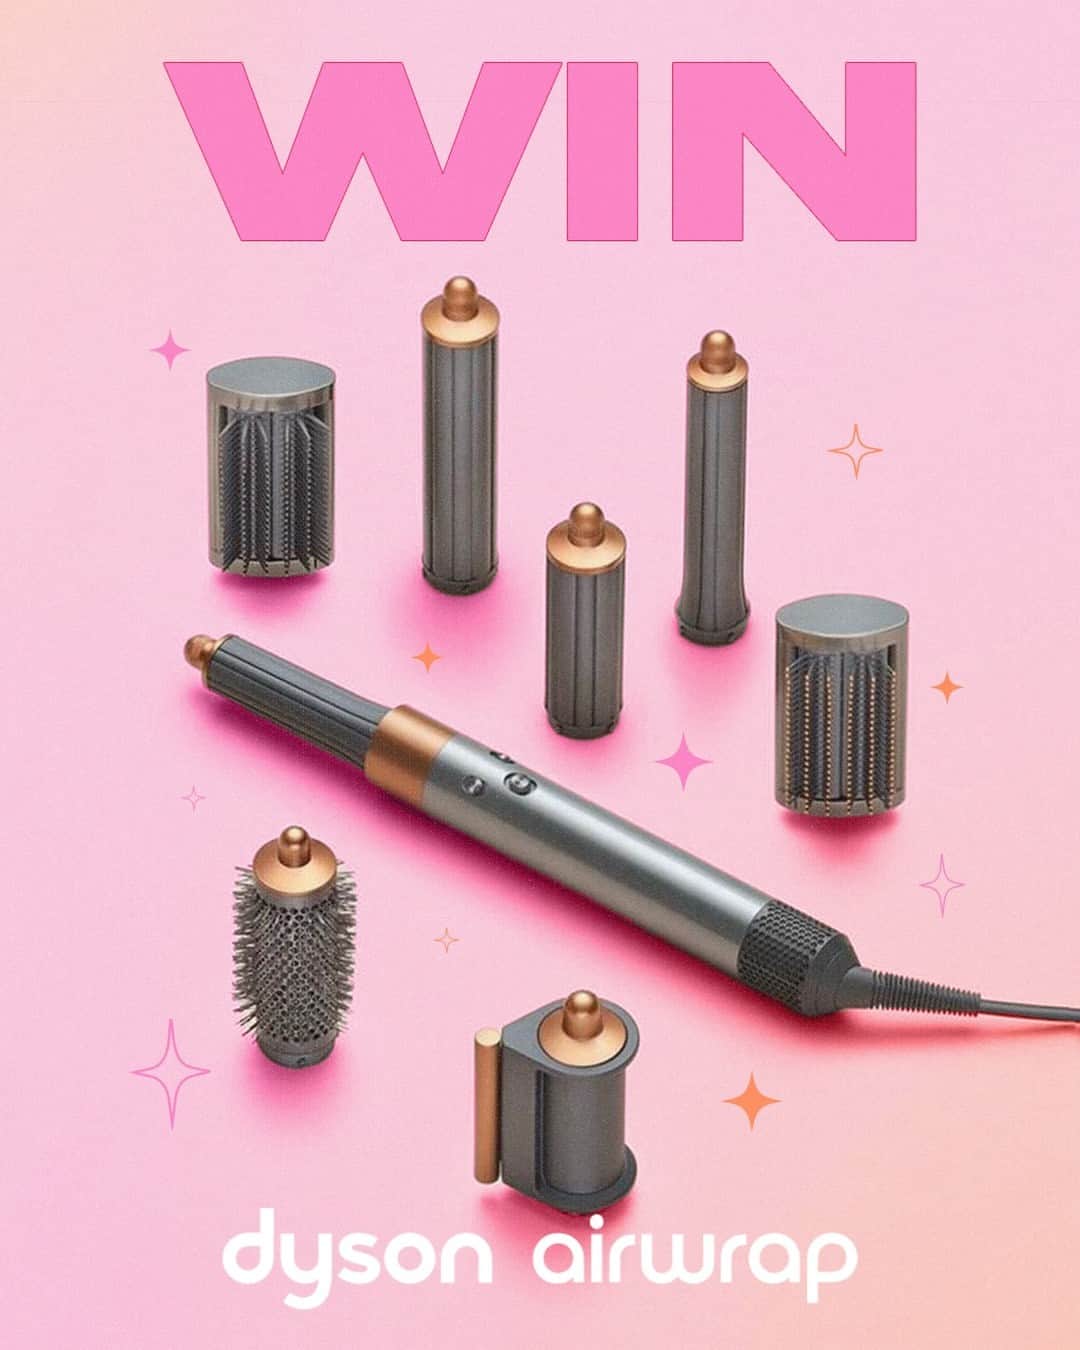 Beginning Boutiqueのインスタグラム：「WIN A DYSON AIRWRAP 💖⁠ ⁠ We are giving one lucky follower the chance to win a Dyson Airwrap Multi Styler! ⁠ ⁠ HOW TO ENTER:⁠ ⁠ ✨ SIGN up to win via the link in our bio - “WIN a Dyson” ⁠ ⁠ ✨ FOLLOW @beginningboutique on Instagram and TikTok⁠ ⁠ BONUS ENTRIES: ⁠ ⁠ ✨ TAG your bestie below who you'd share your Dyson with! ⁠ ⁠ *T&Cs apply. Only open to Australian followers. Entries close Friday, 22nd December, 11:59pm AEST. Winner will be chosen at random and contacted via Insta DM’s! Winner will only be contacted via this account! Product will be shipped out first week of January 2024. ⁠ ⁠ This promotion is in no way sponsored, endorsed or administered by, or associated with, Instagram.」